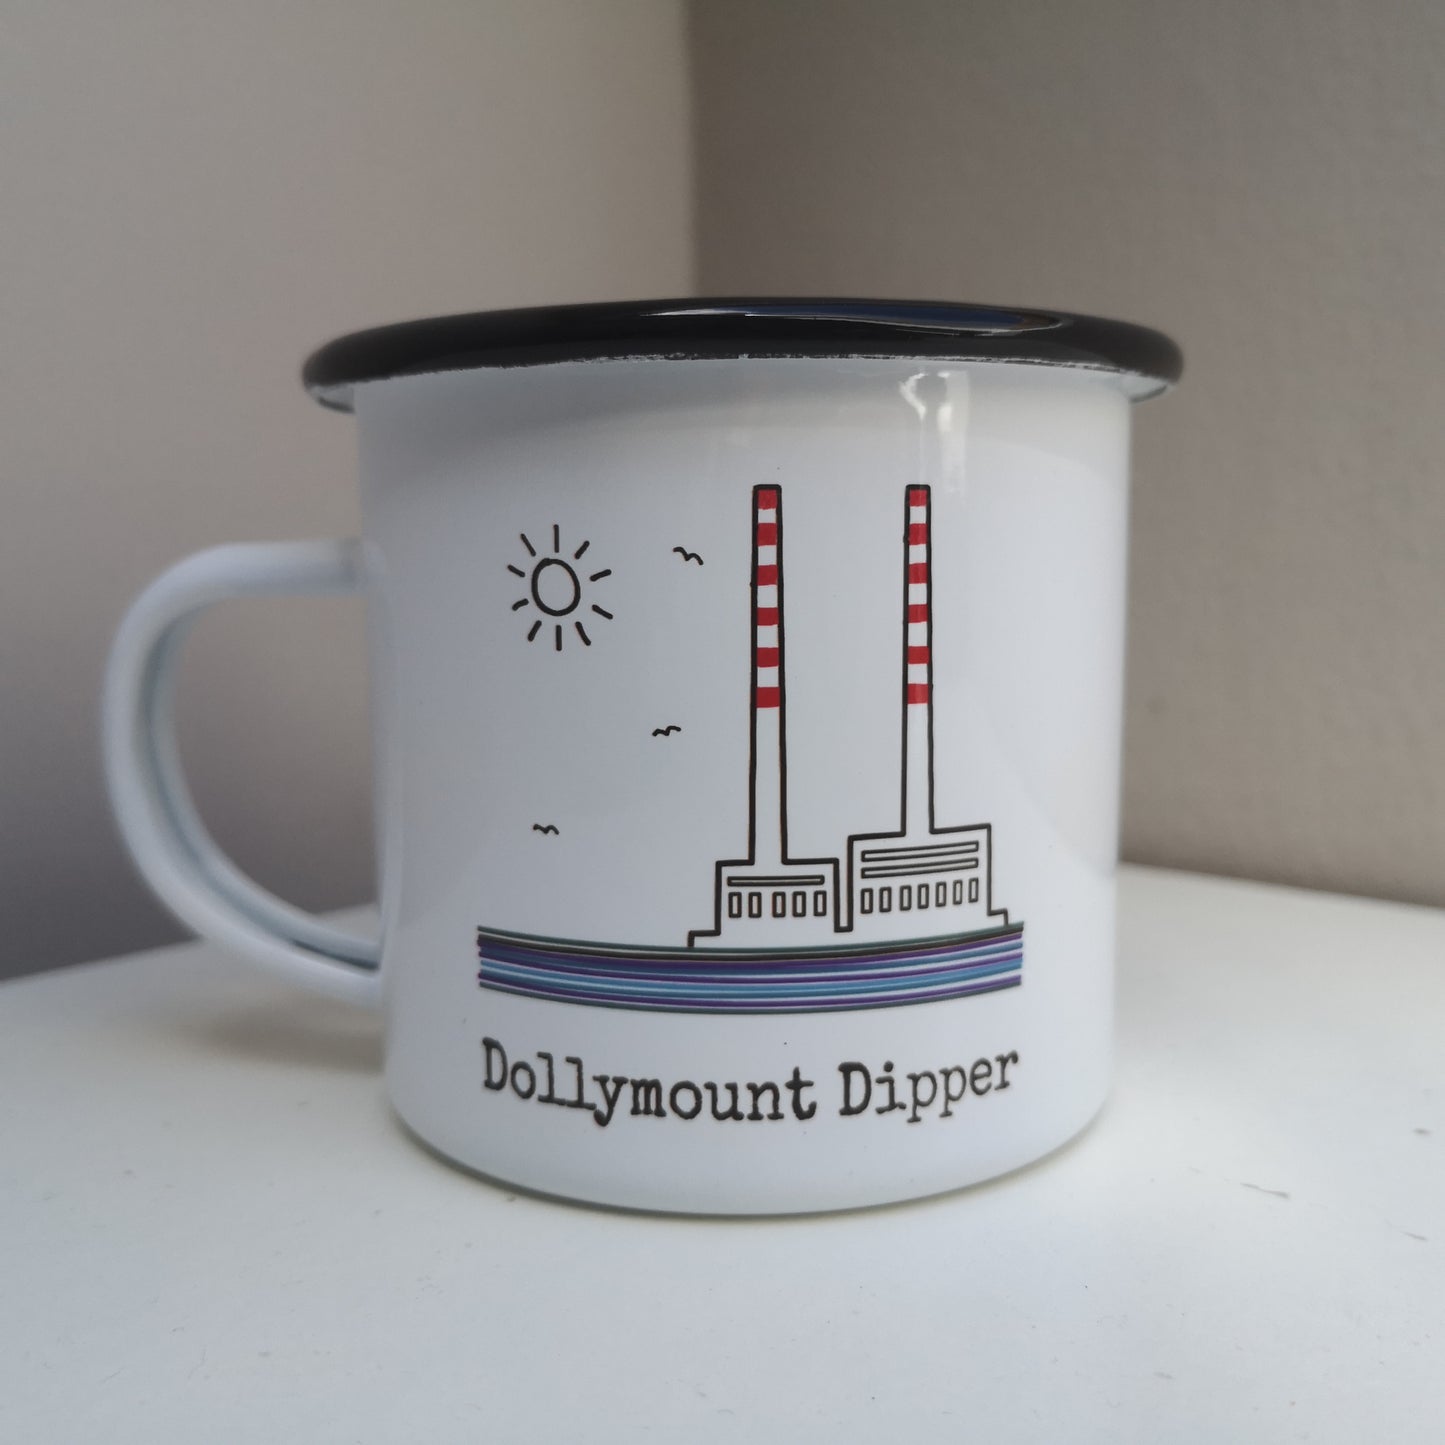 A white steel enamel mug with the poolbeg towers on it, with DOLLYMOUNT DIPPER written in type font below